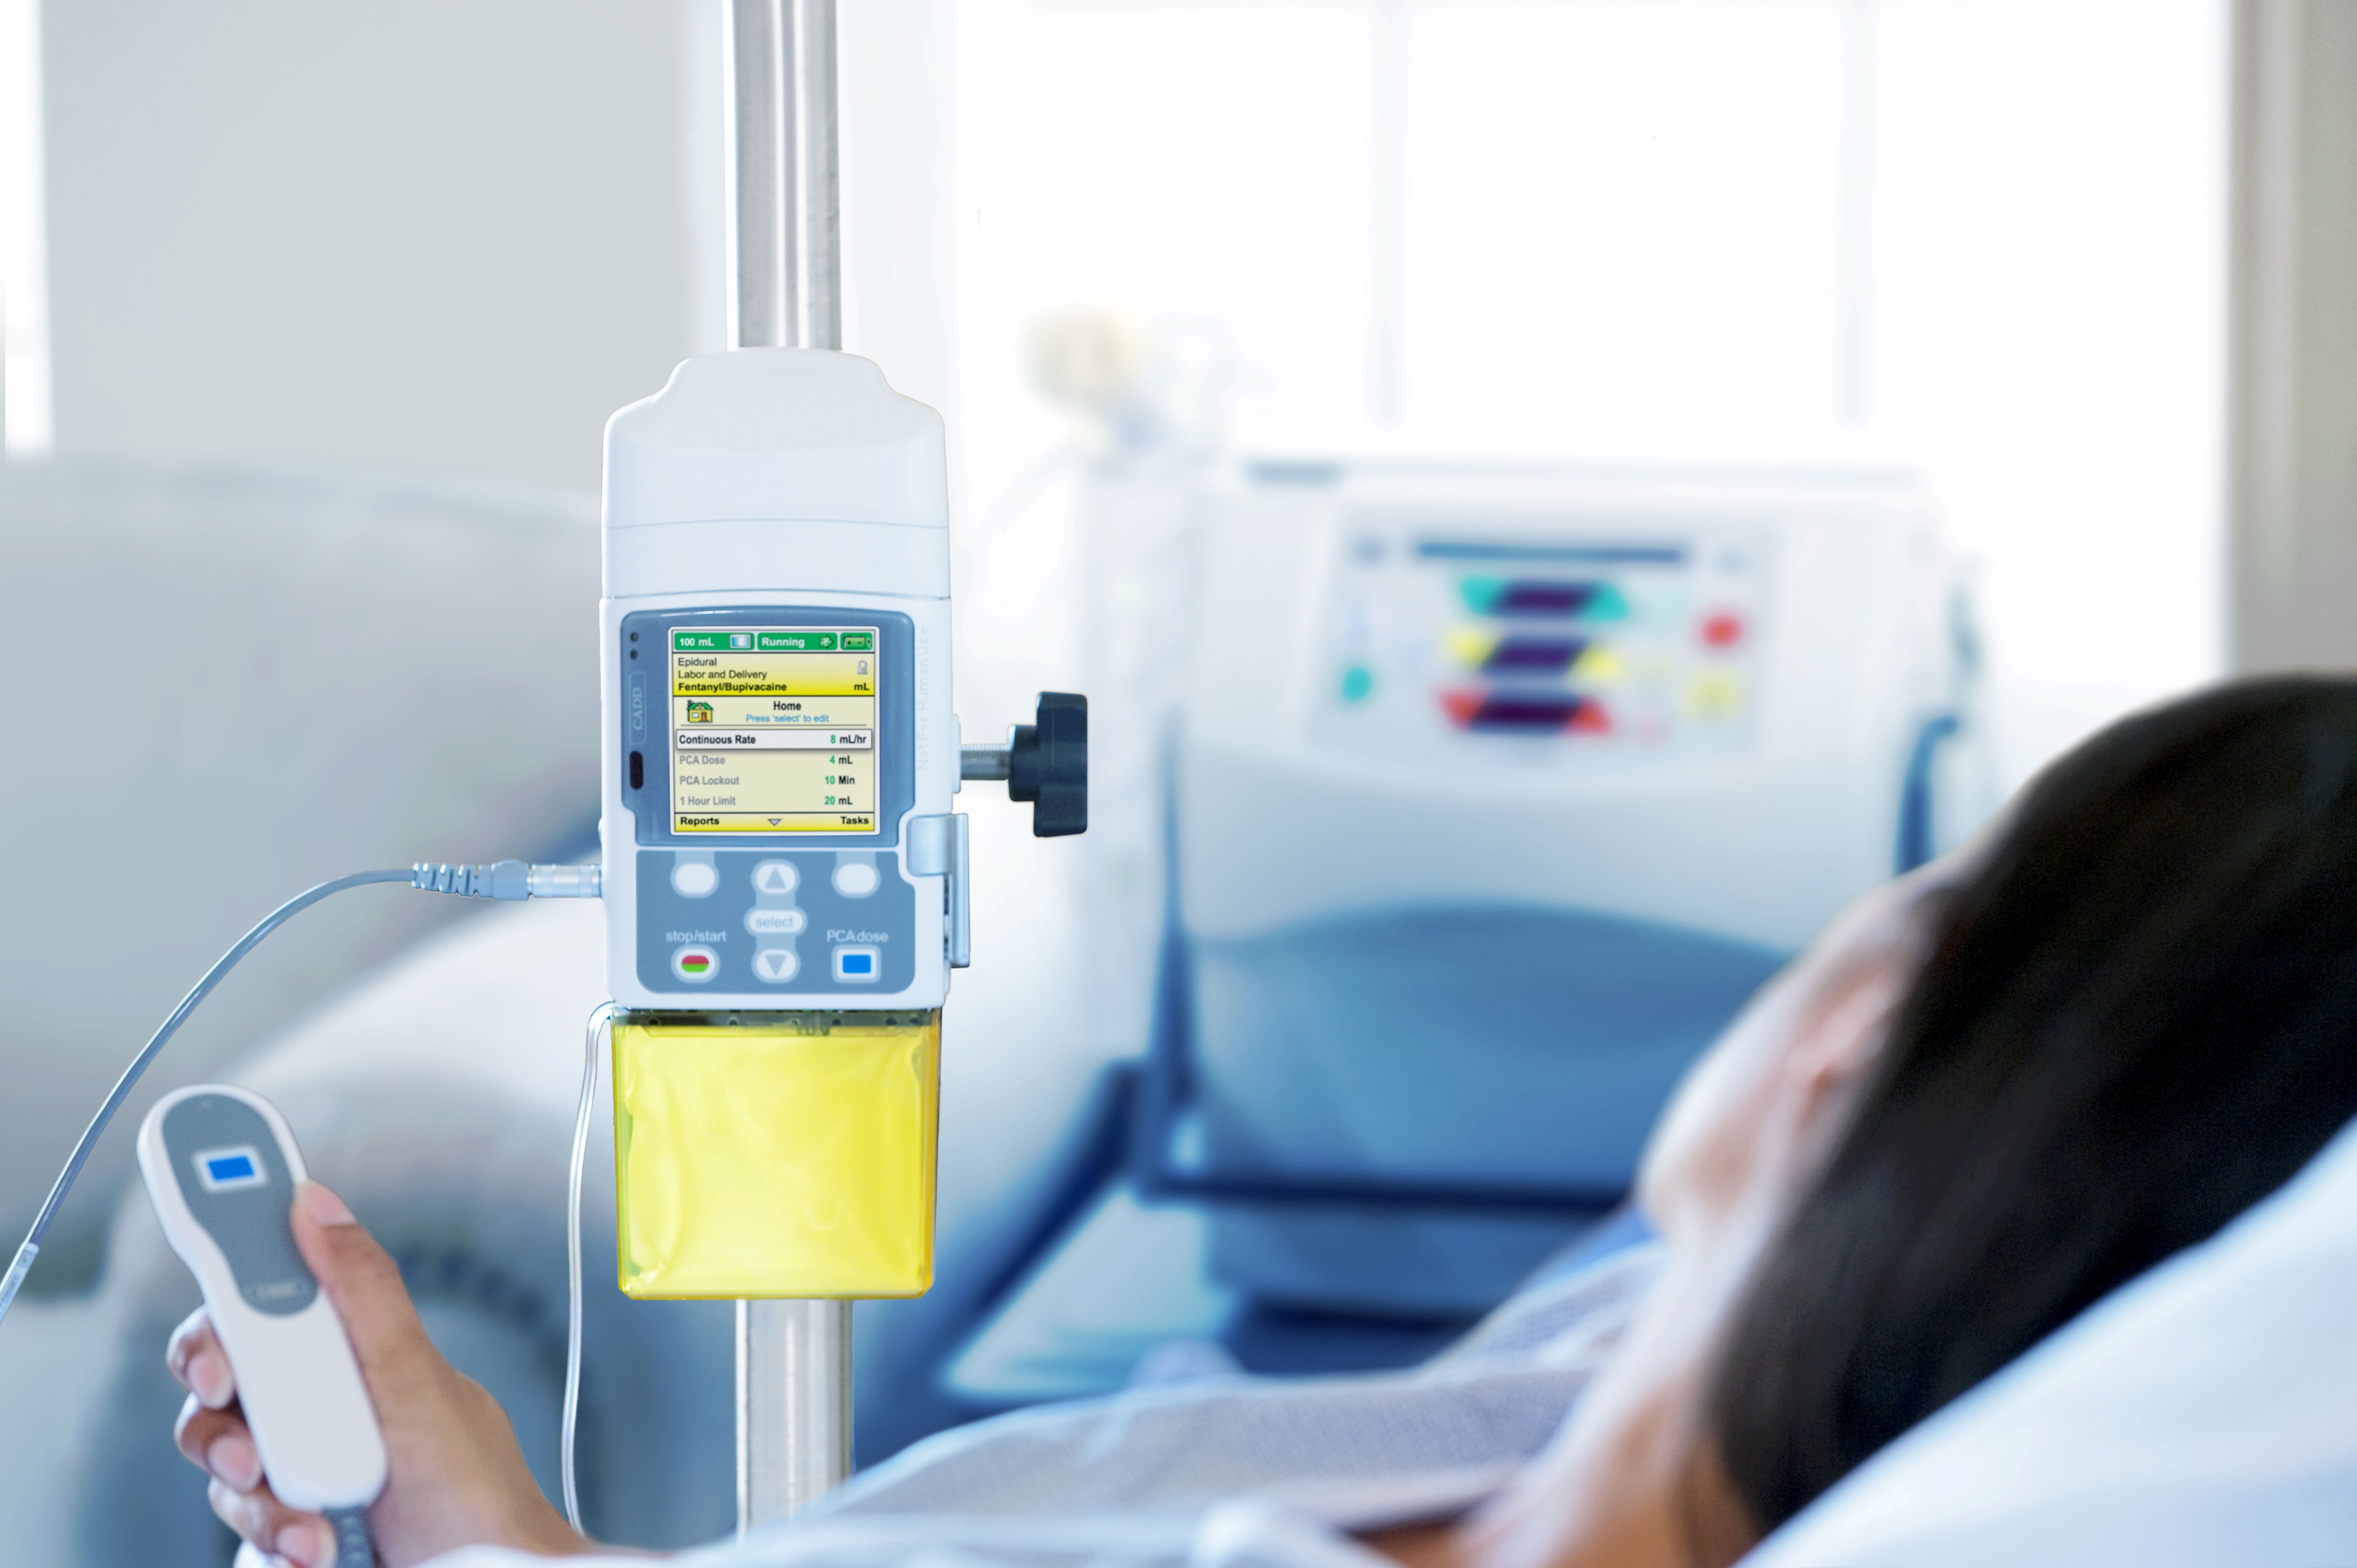 Decreasing the cost of ownership for medical devices